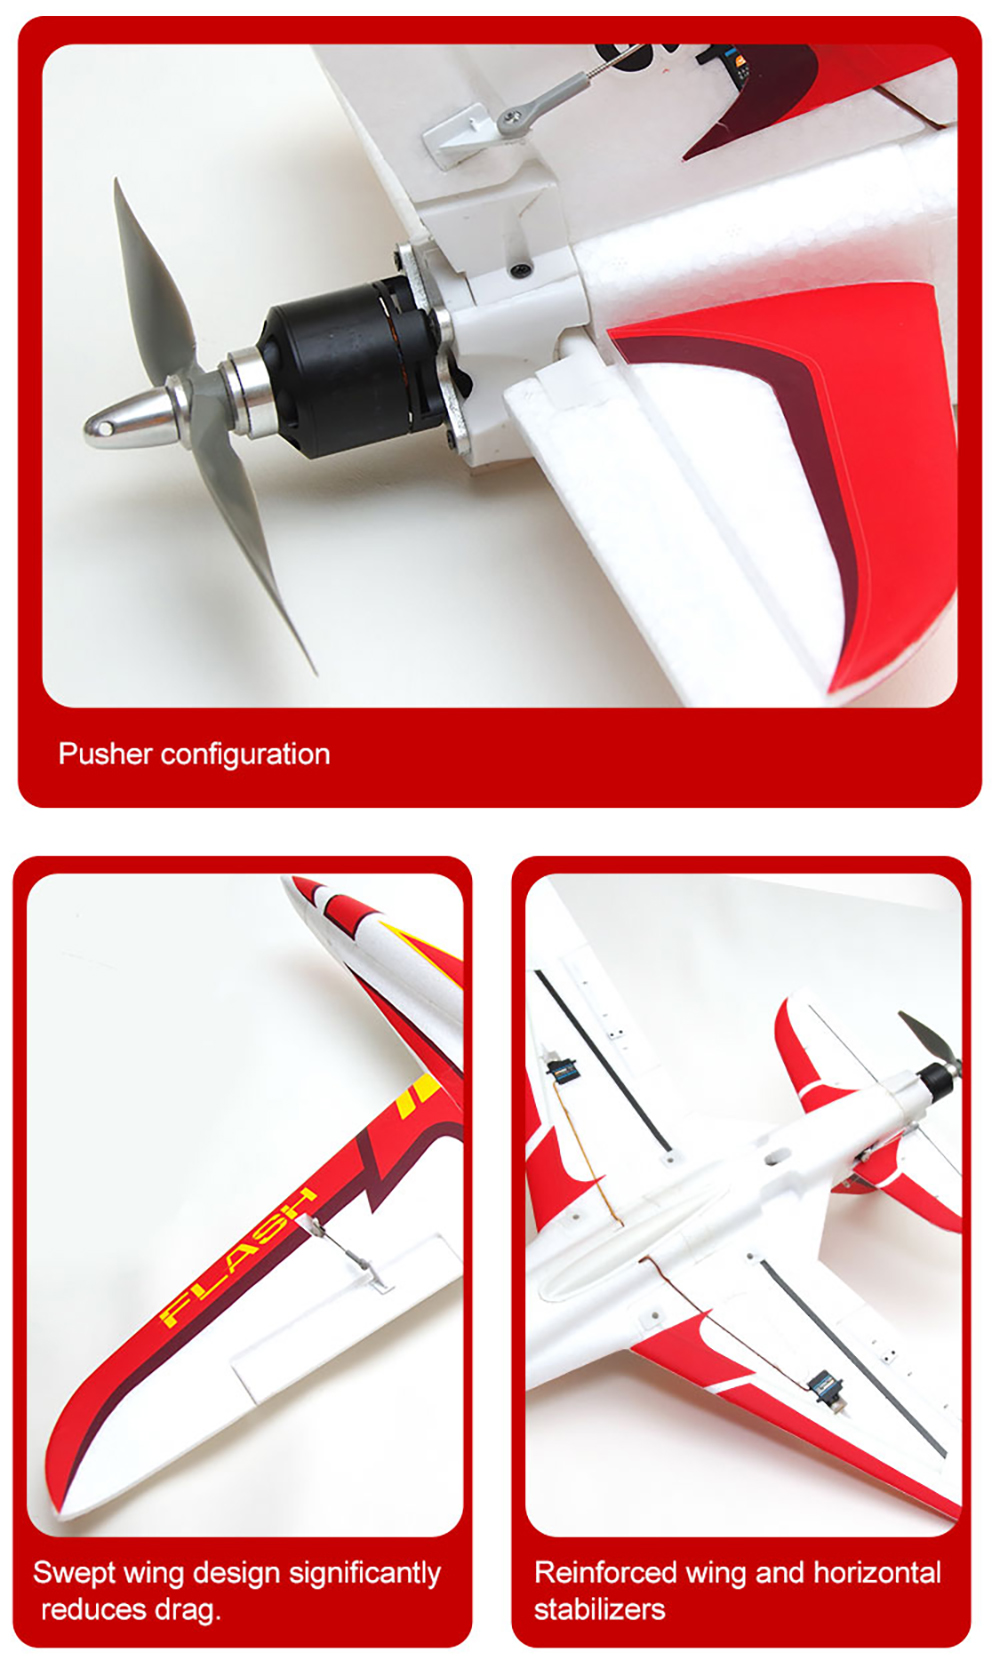 FMS-850mm-Wingspan-Flash-High-Speed-180kmh-4S-Racer-EPO-RC-Airplane-PNP-with-Reflex-Stabilizer-Fligh-1774714-3